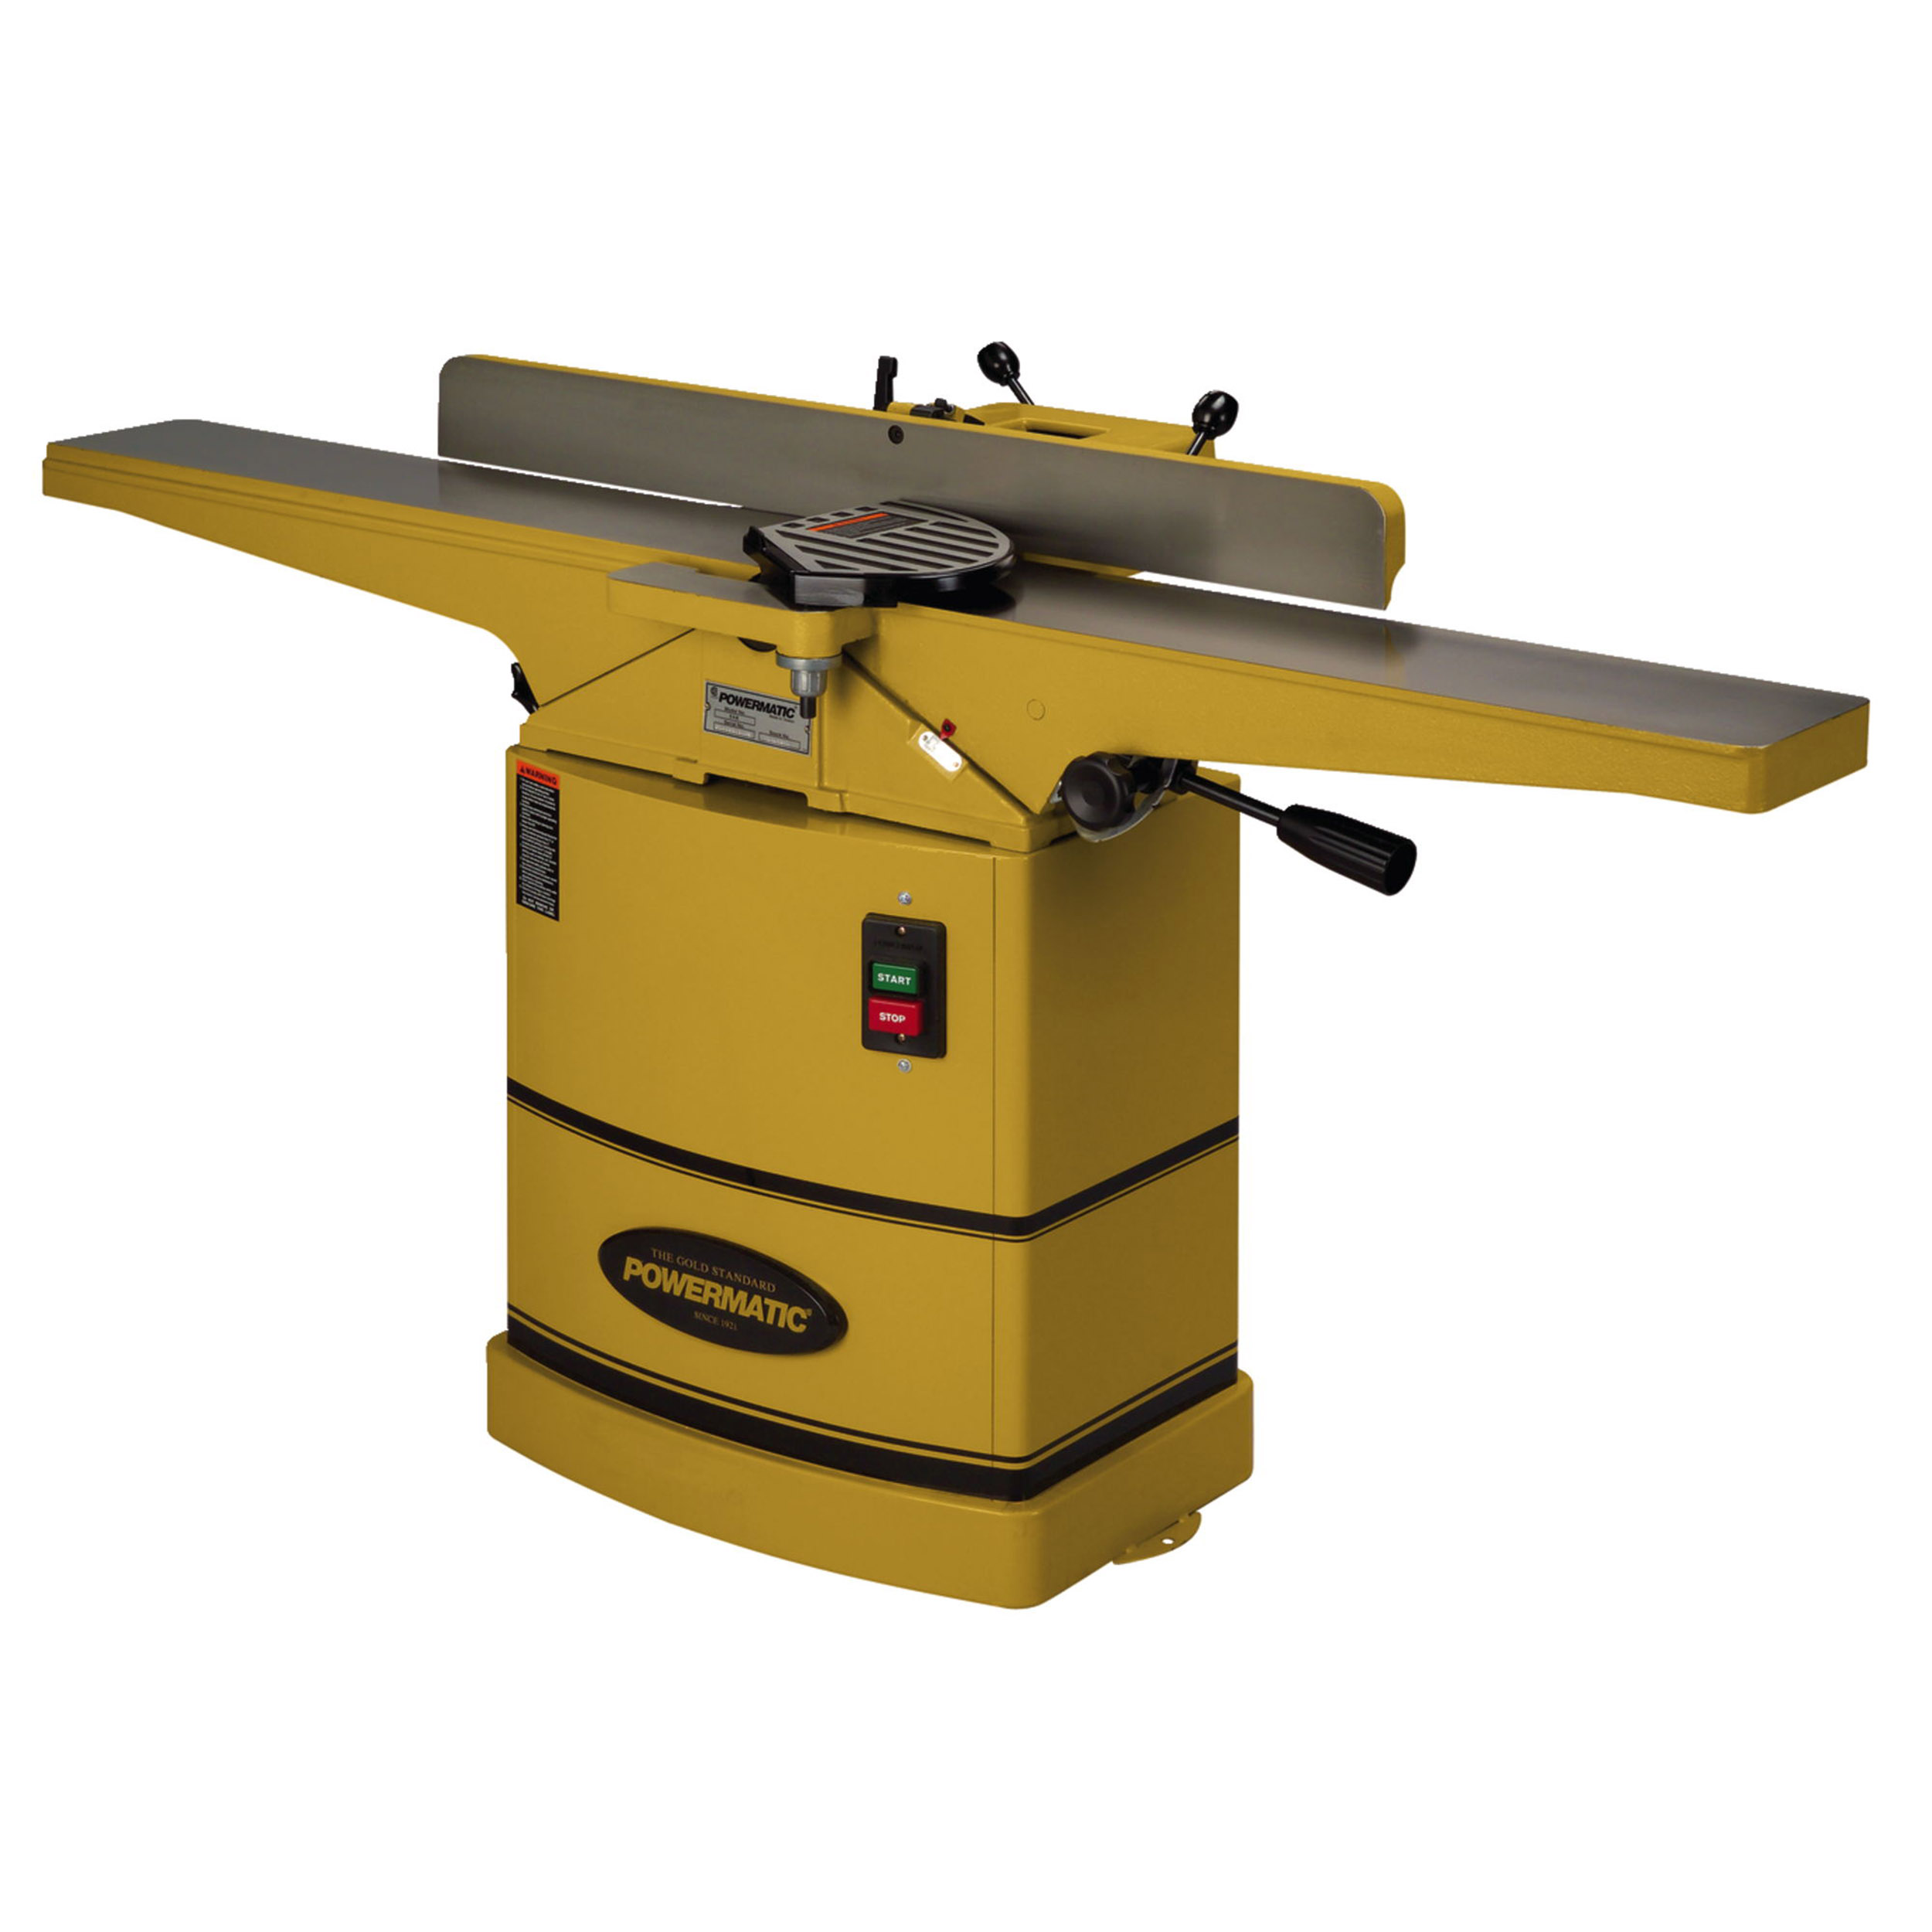 6" Jointer With Helical Cutterhead, Model 54hh